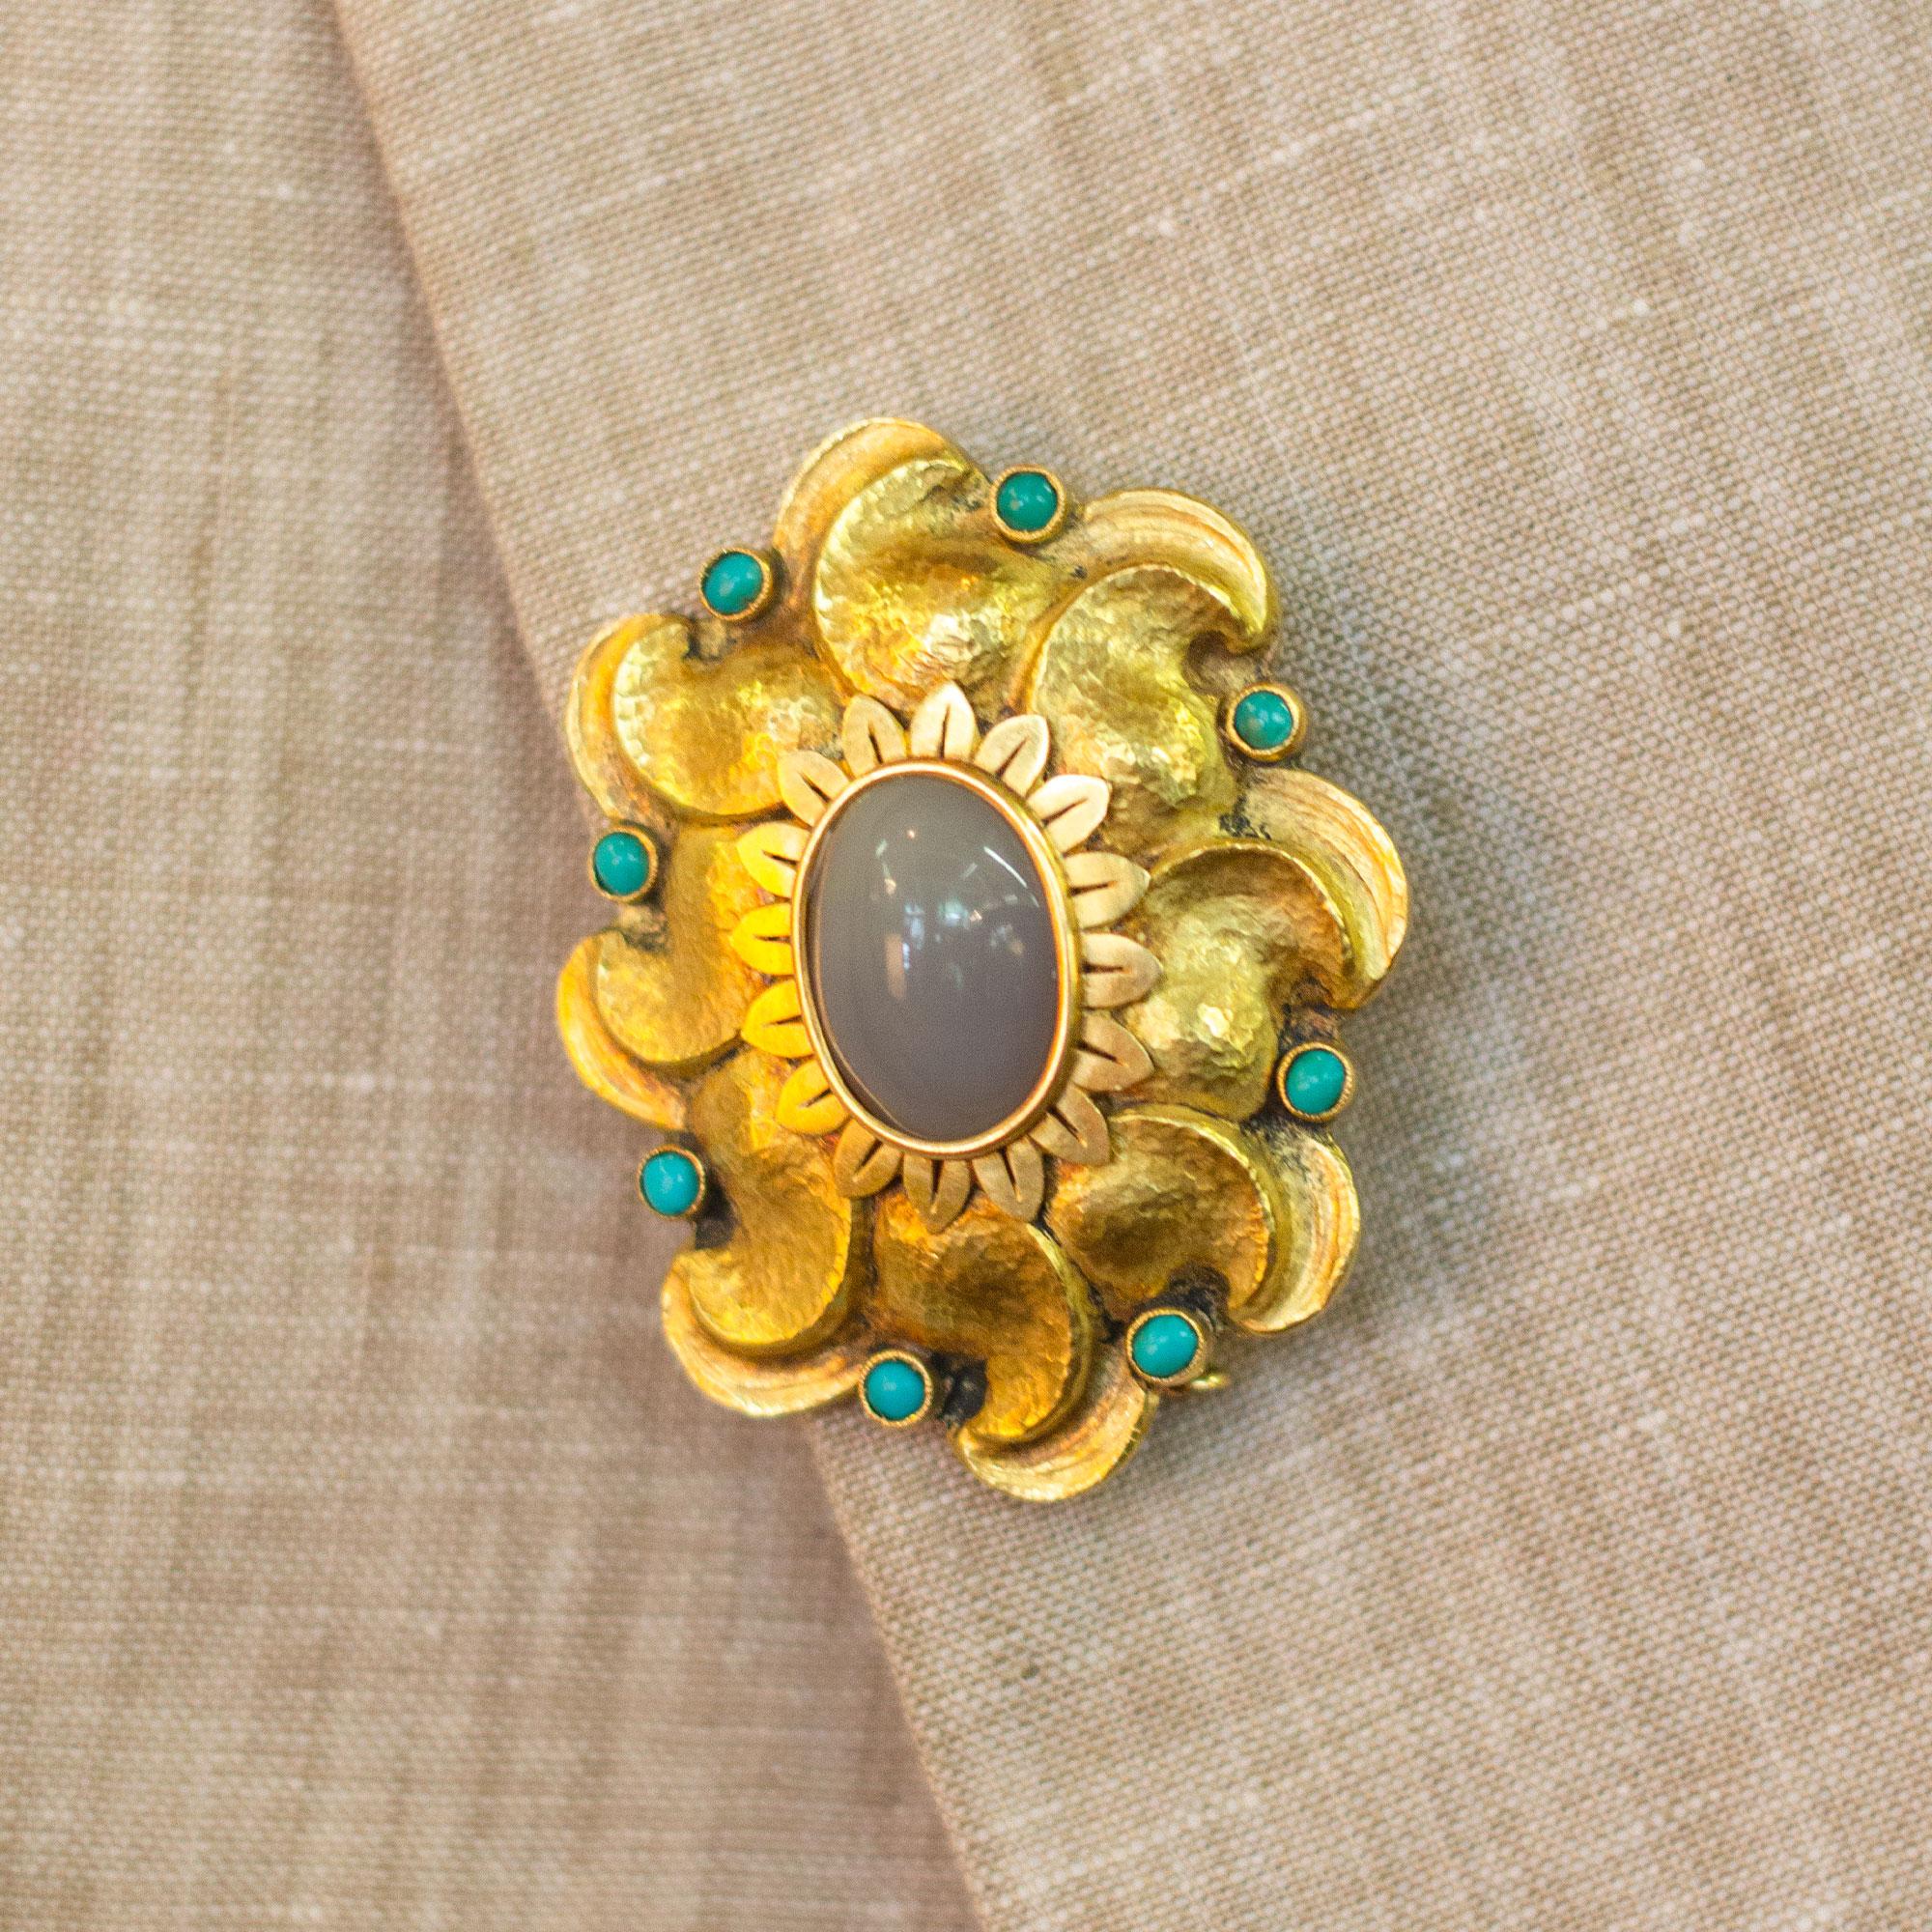 An 18kt hammered yellow gold, agate and turquoise brooch pin. This piece is finished beautifully with cabochon cut turquoise pieces and a large cabochon agate in the centre, surrounded by gold flower petals. The hand sculpted and hammered gold is